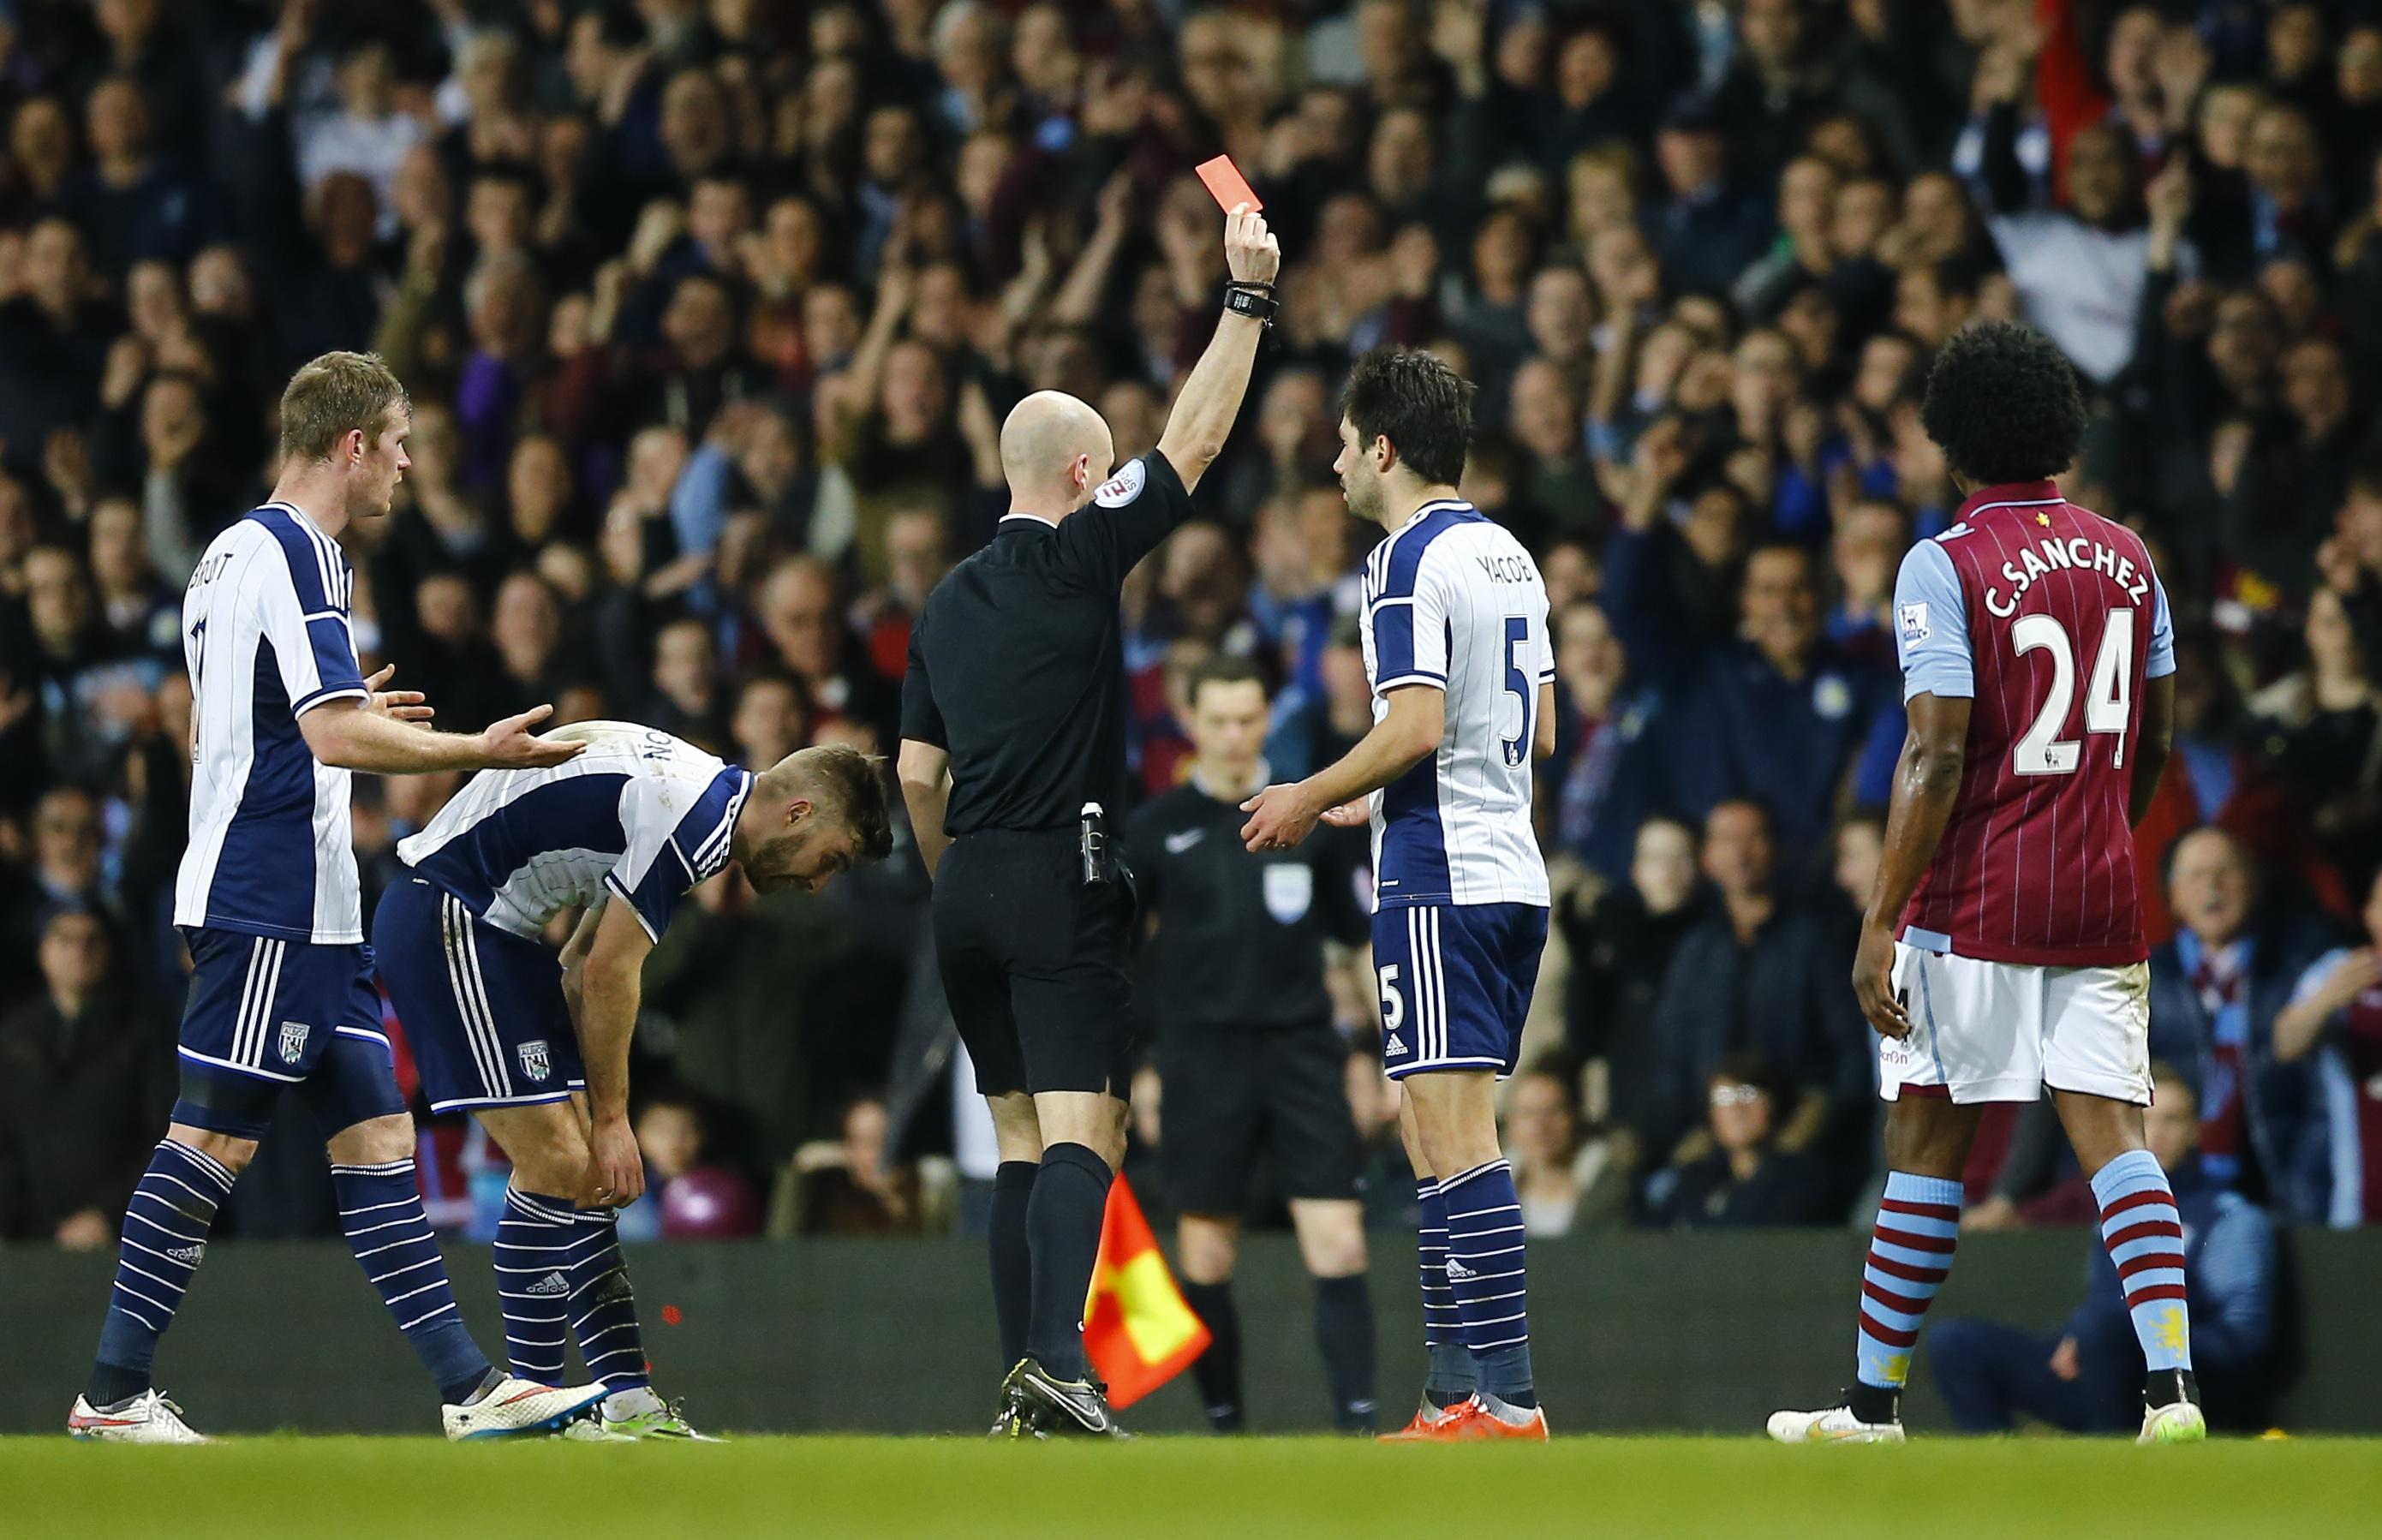 Referee Anthony Taylor sends off West Brom's Claudio Jacob. Colour psycghology suggests black shirts command discipline. Photo: Reuters 